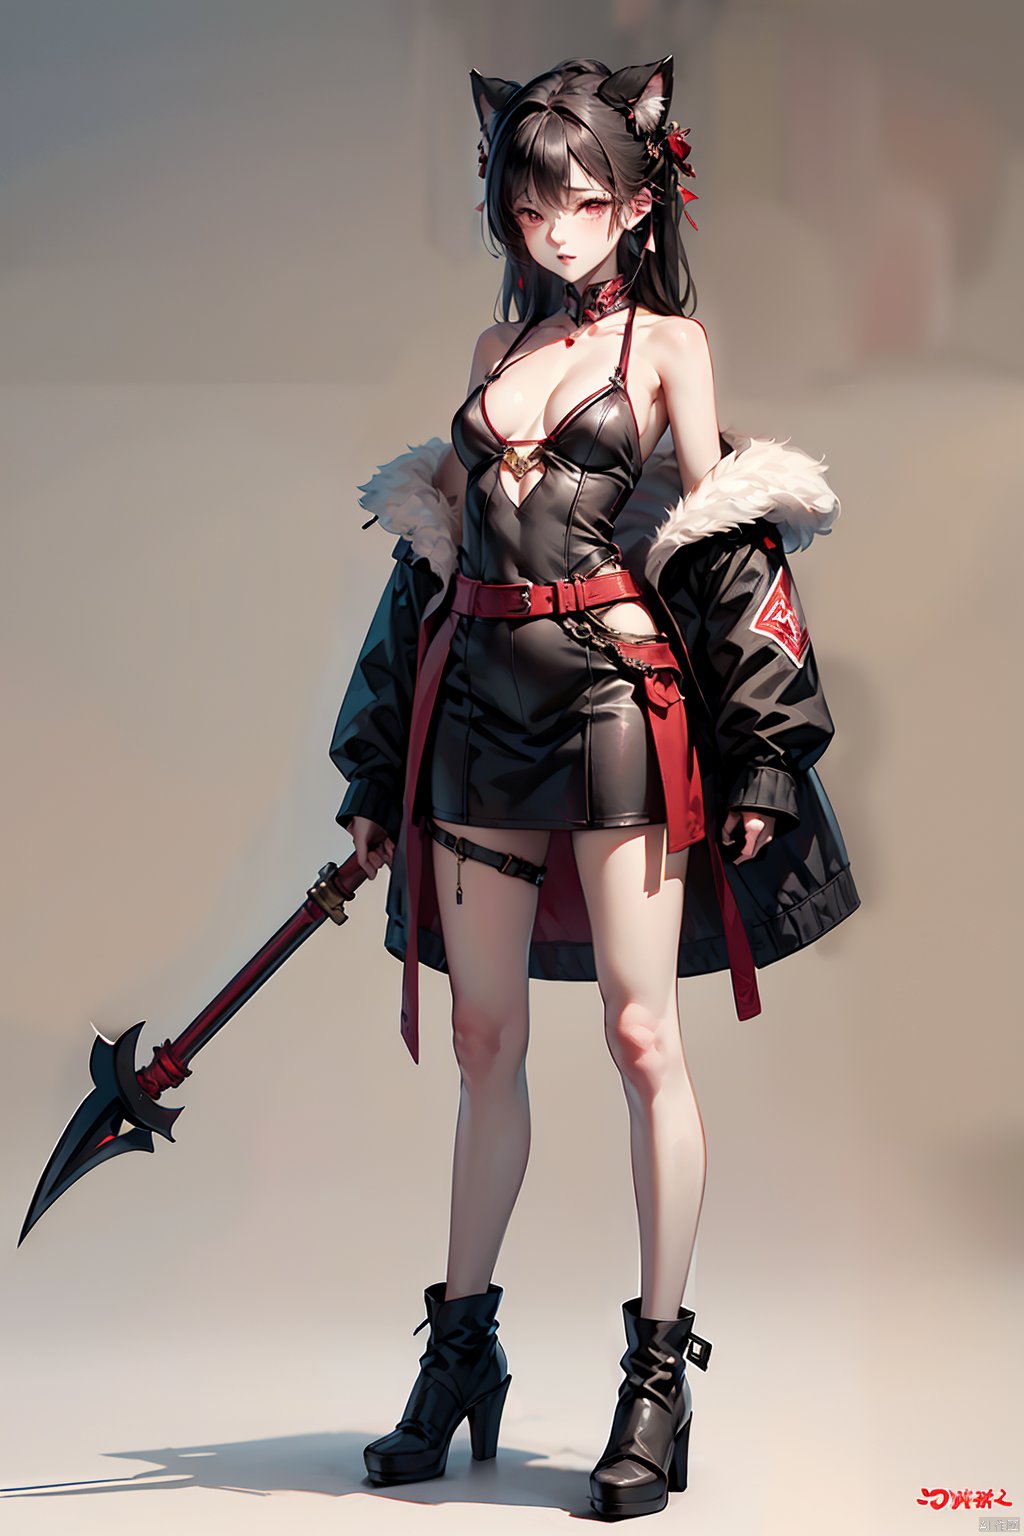 best quality,1girl,full body,game,devil's horn,cat's ear,furry,big cat's paws,ultra-short coat,open shoulder,big chest,holding a death sickle as a weapon,simple_background,game character design,